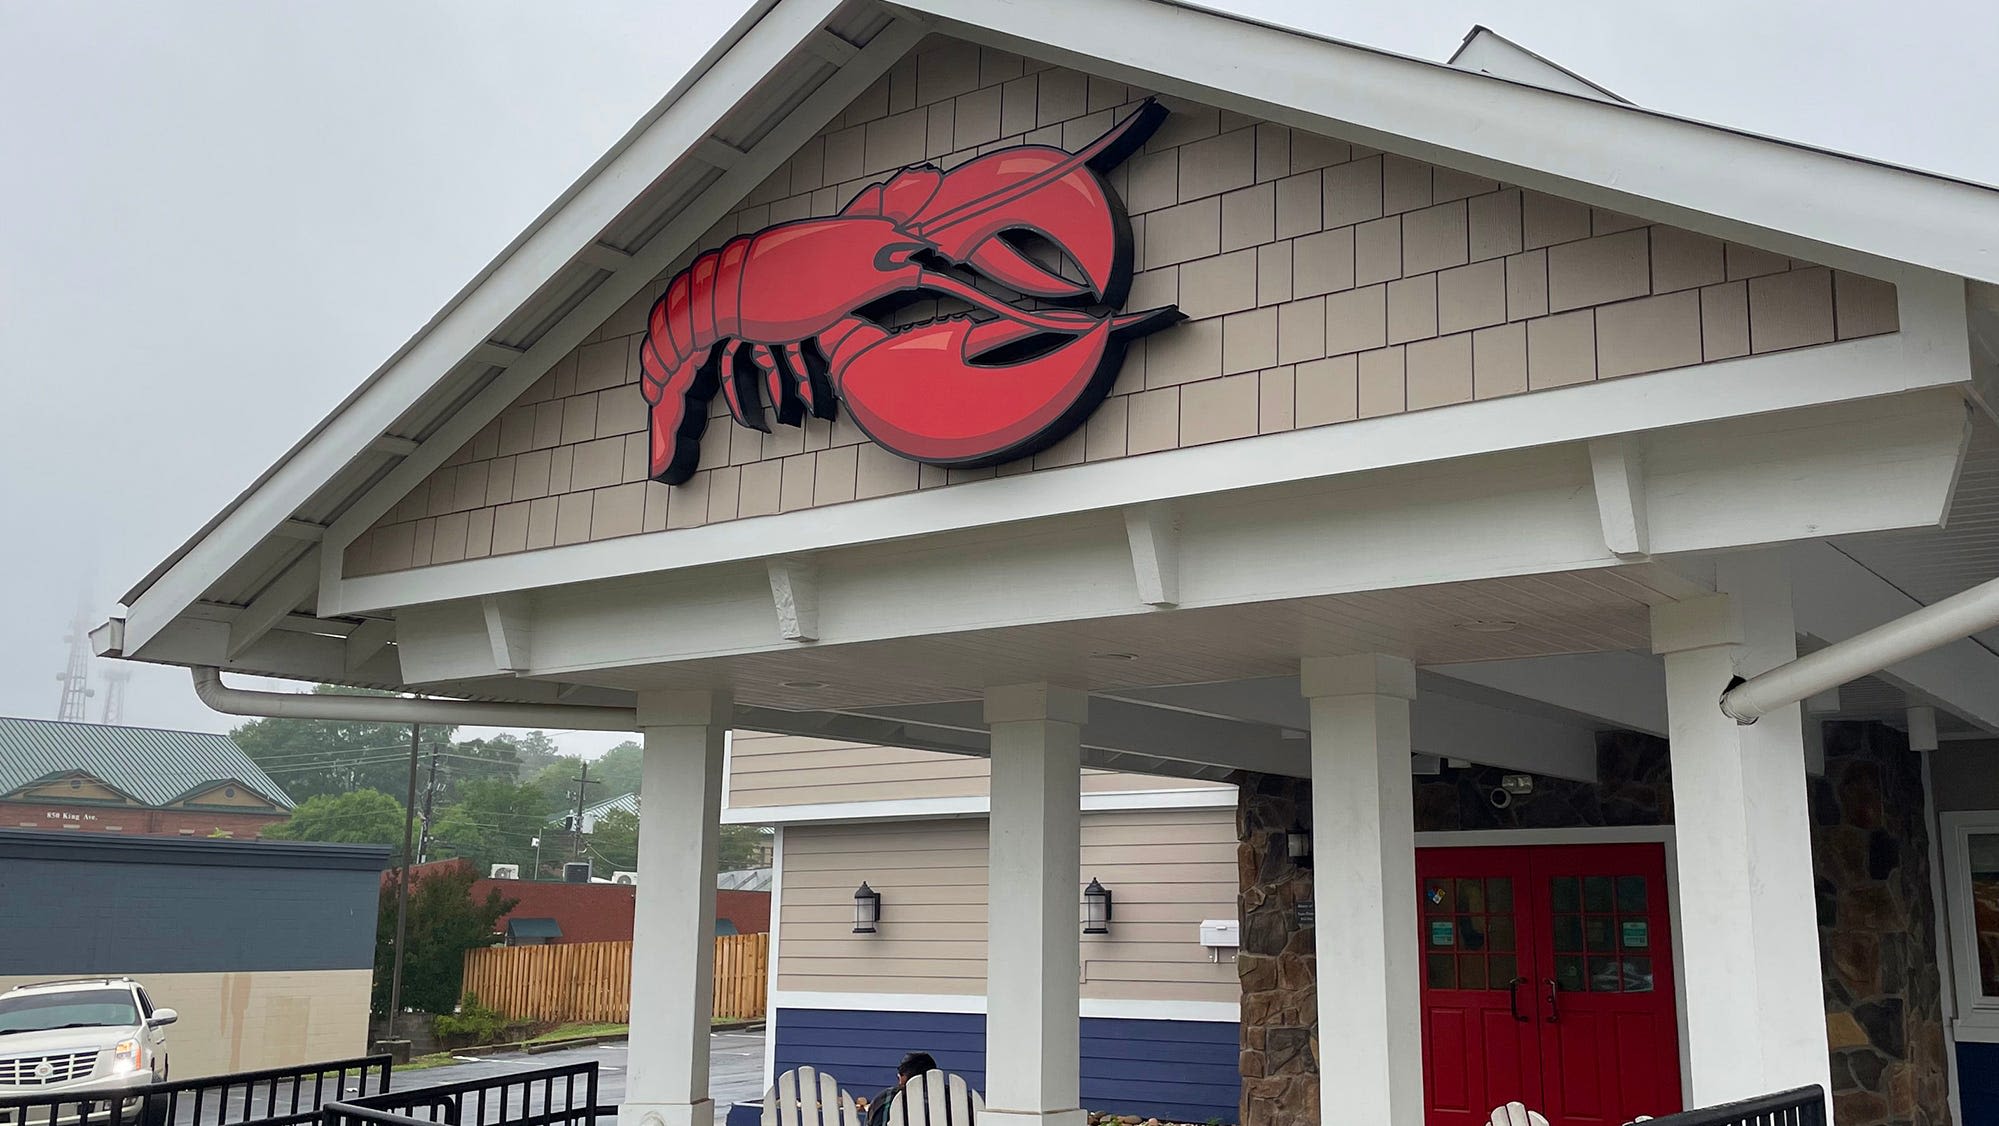 Red Lobster closes Athens restaurant along with more than 80 locations across U.S.